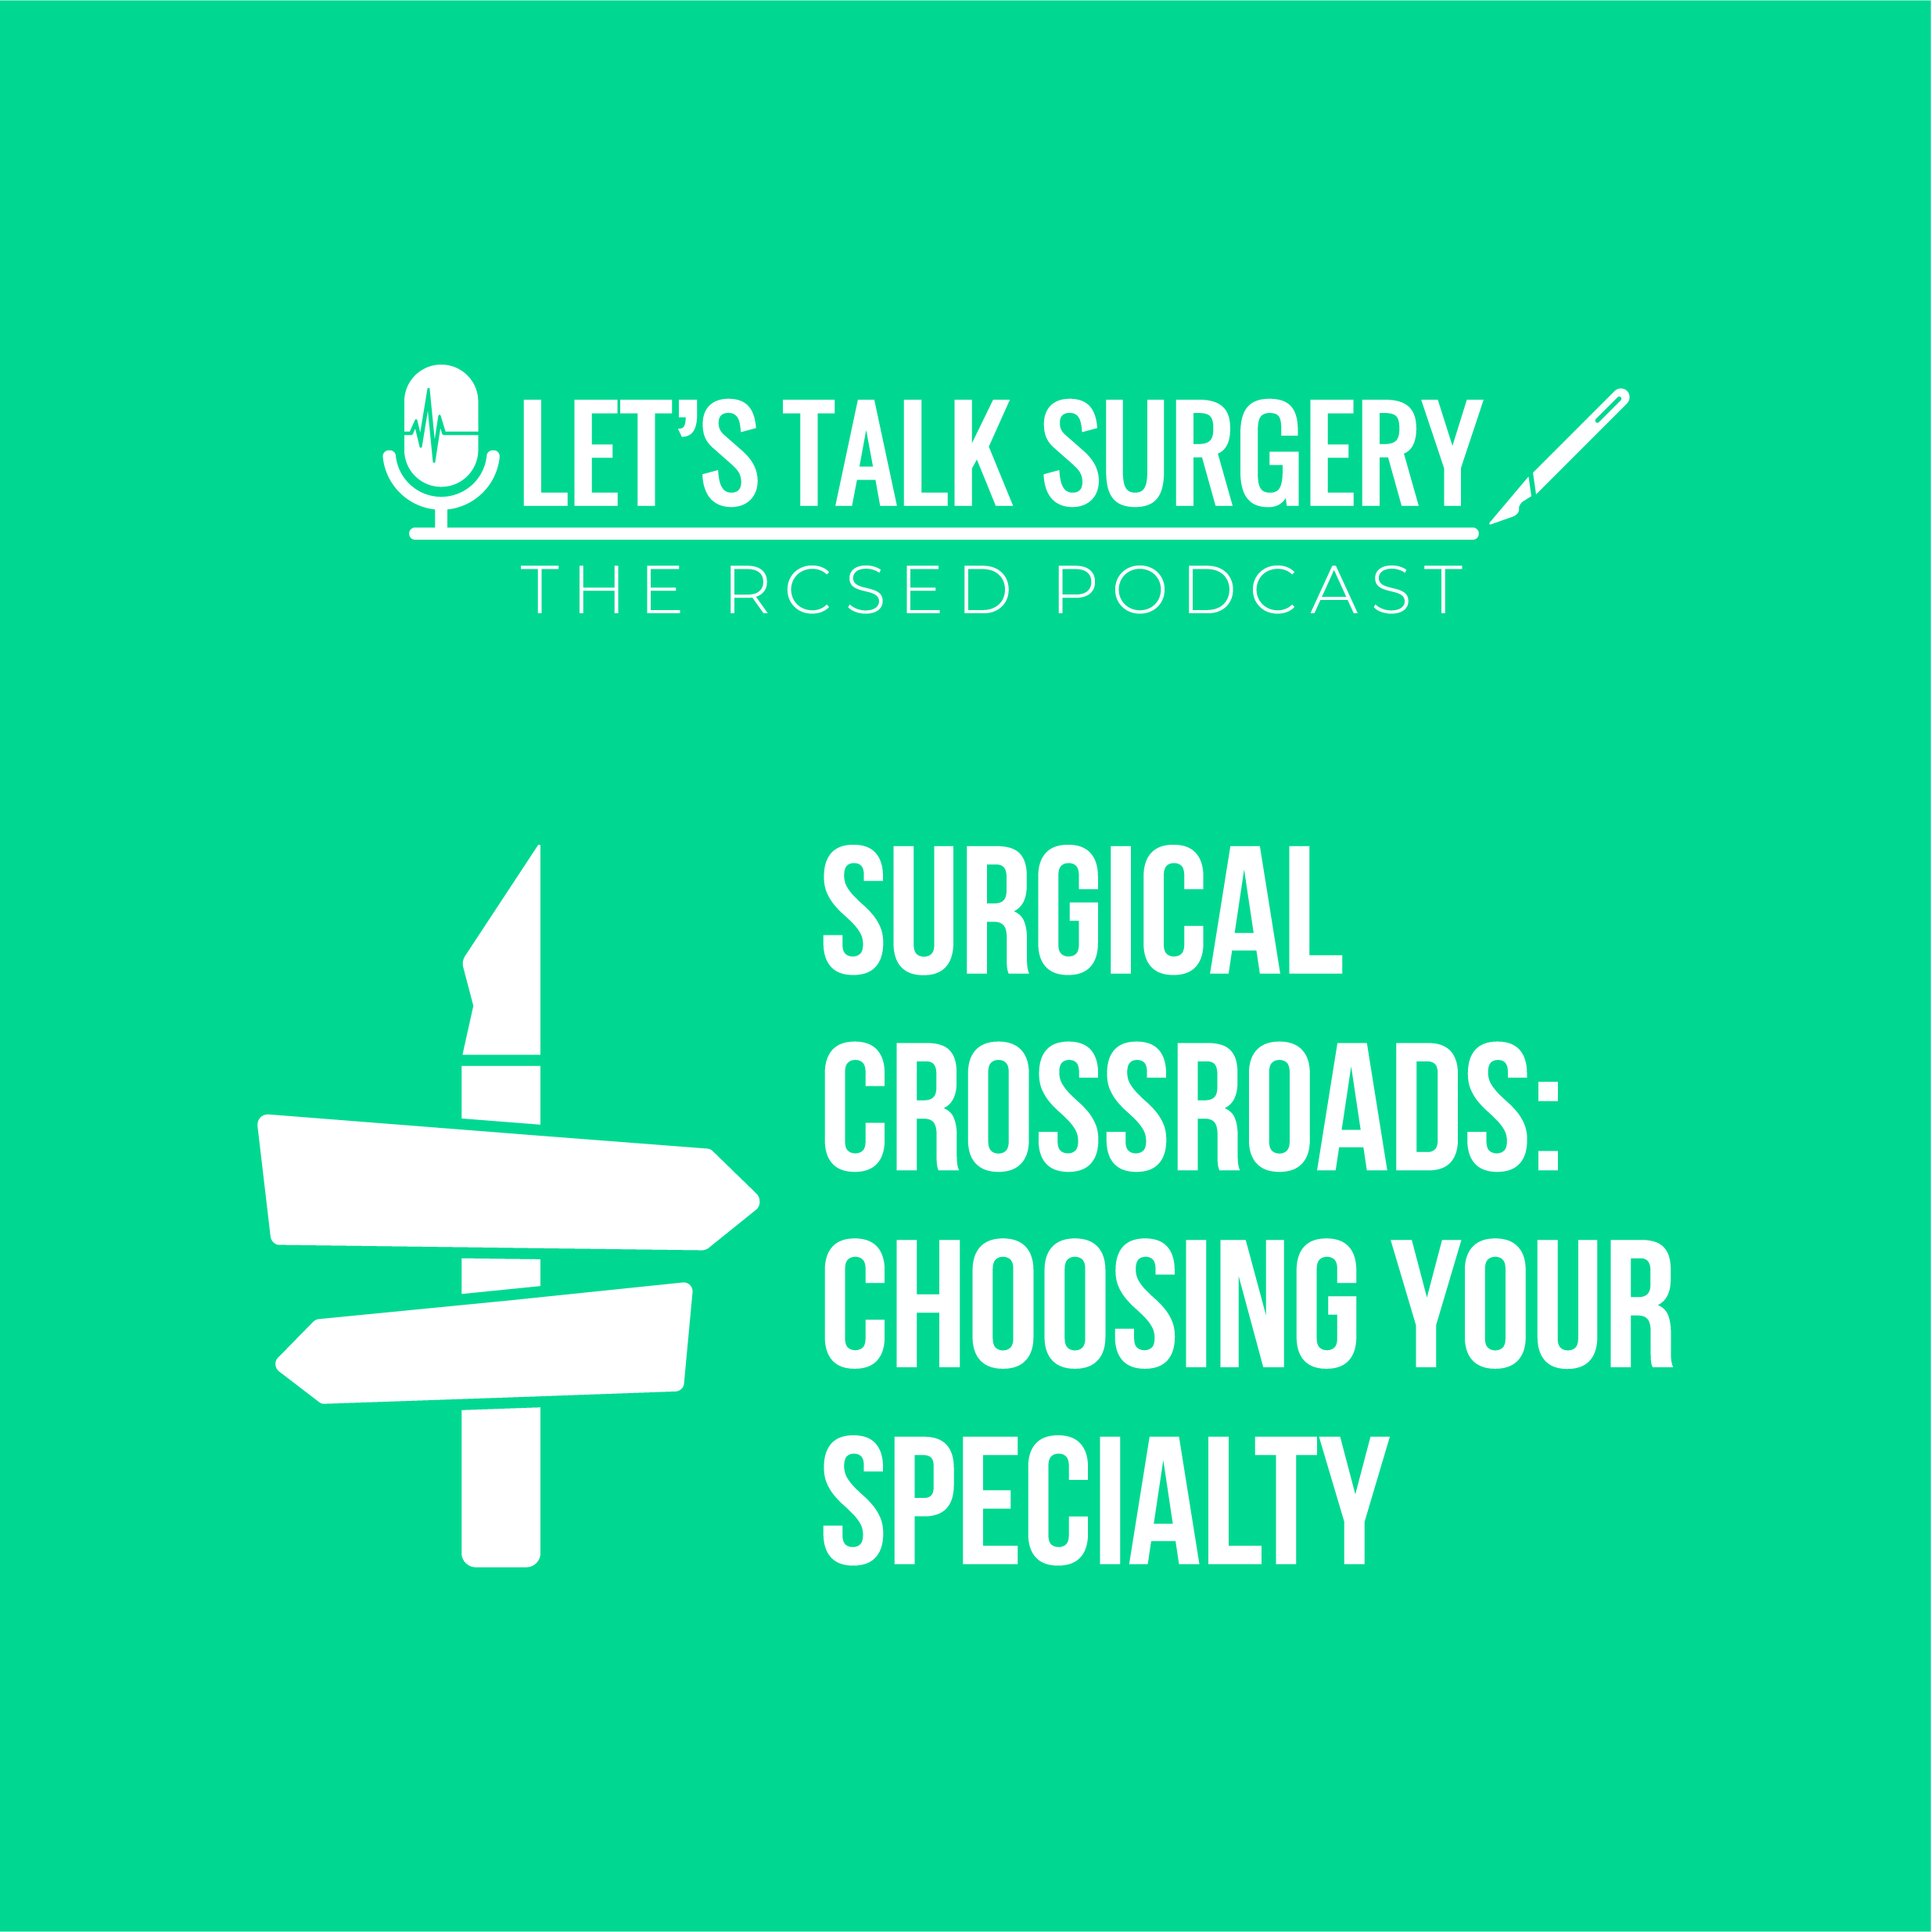 Let's Talk Surgery Podcast, Surgical Crossroads: "Choosing your specialty - the General Surgery episode"